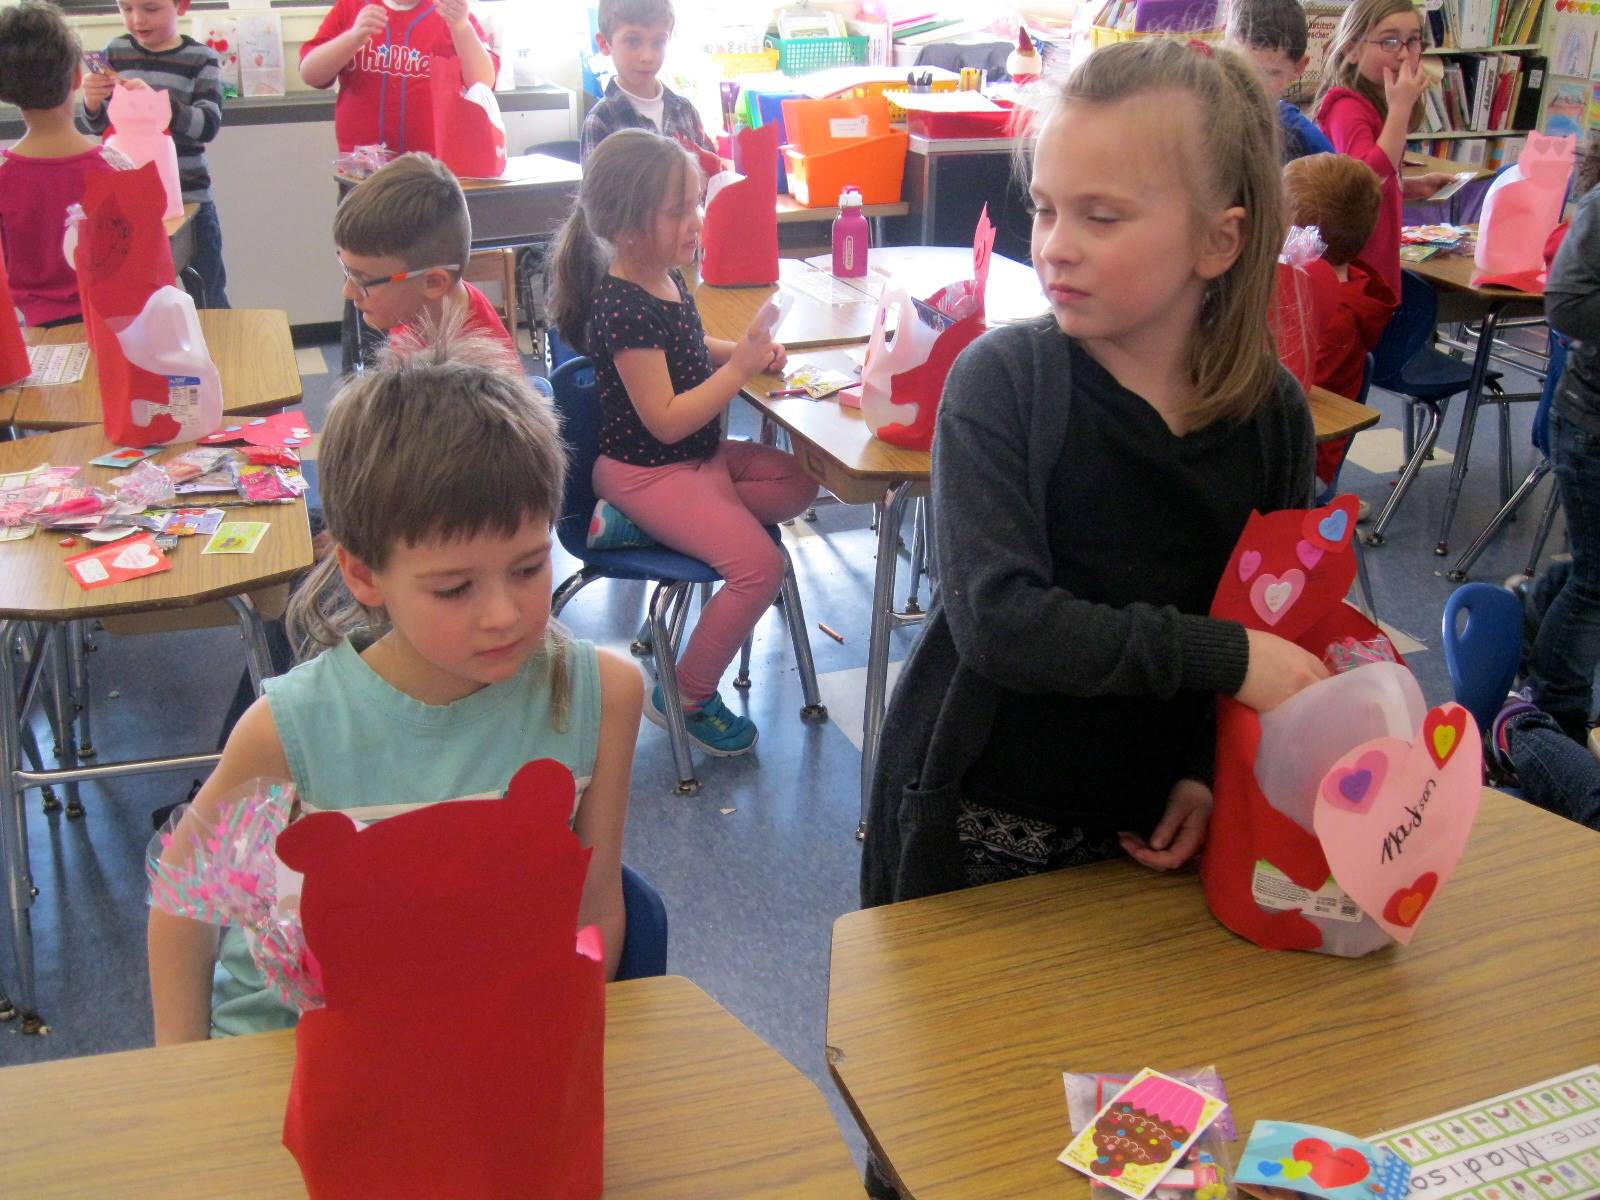 2 students look at valentine's.